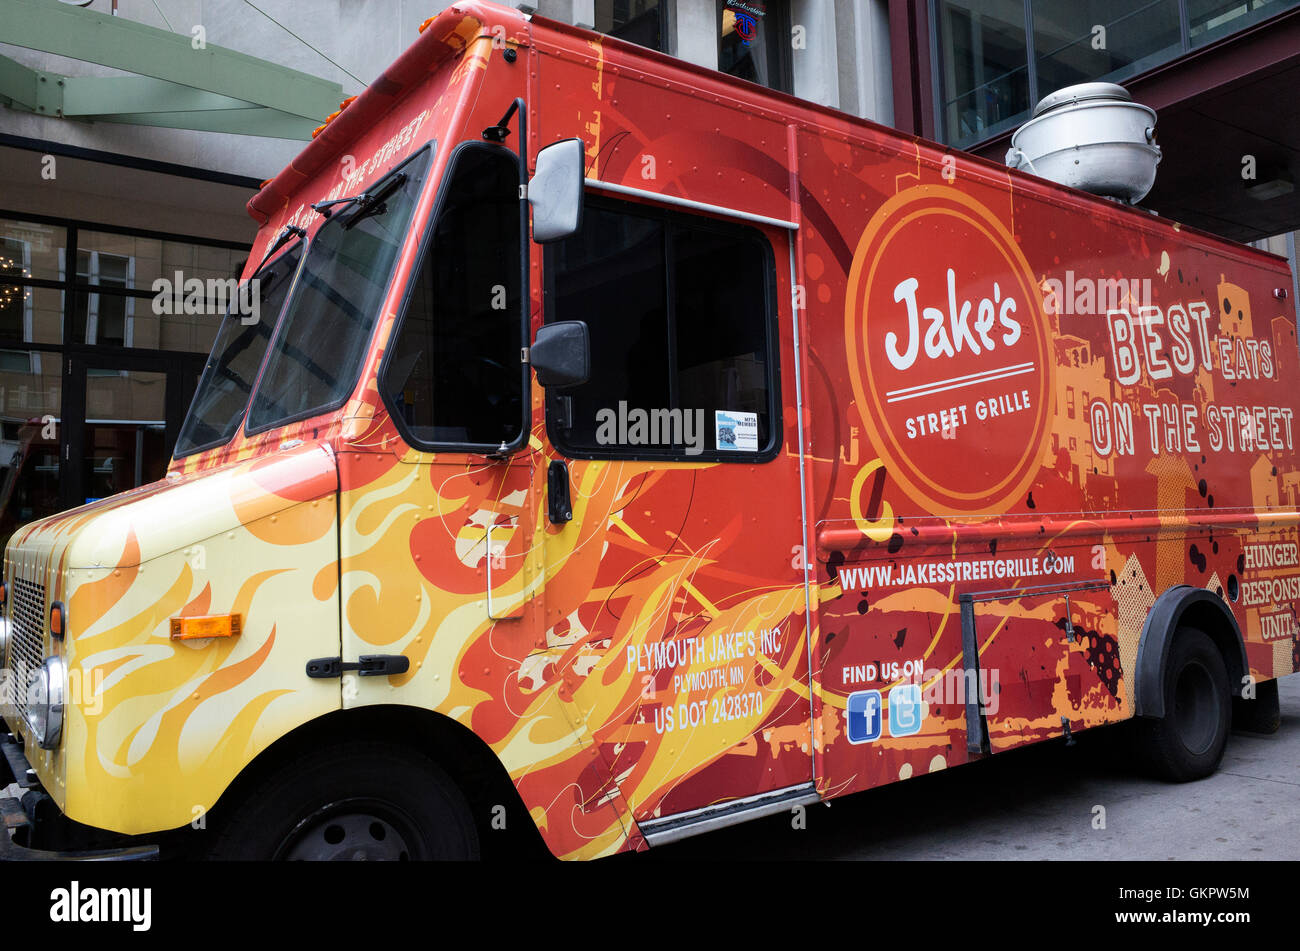 Jake's Street Grille mobile street food truck serving burgers, sandwiches, tacos, wings and more. Minneapolis Minnesota MN USA Stock Photo